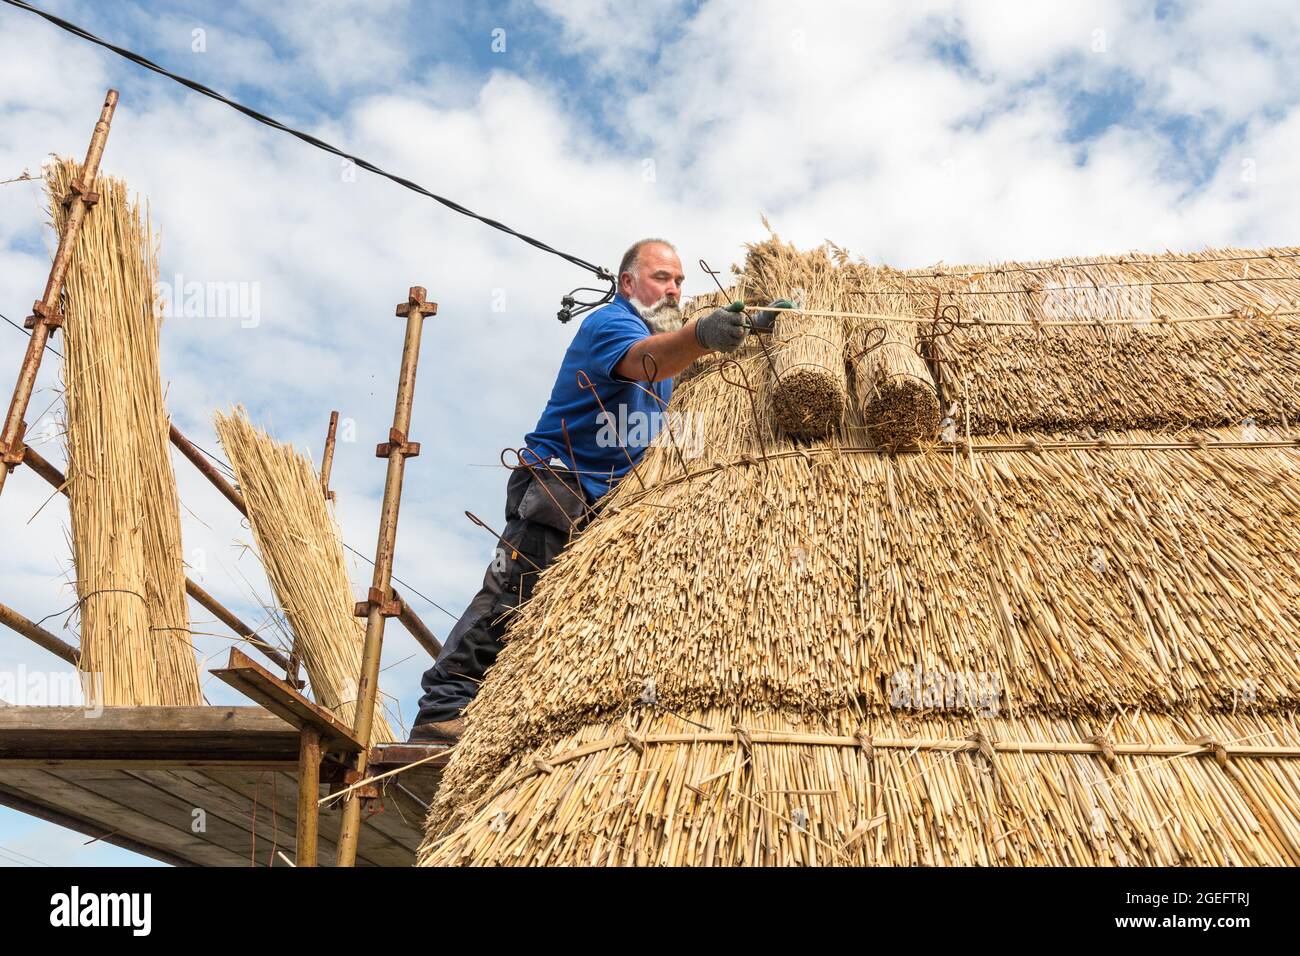 Fenit, Kerry, Ireland. 19th August, 2021. Master thatcher, Richard Ó Loideoin  working at the traditional craft of thatching on a roof at Chapeltown near Fenit, Co. Kerry, Ireland. - Picture; David Creedon / Alamy Live News Stock Photo